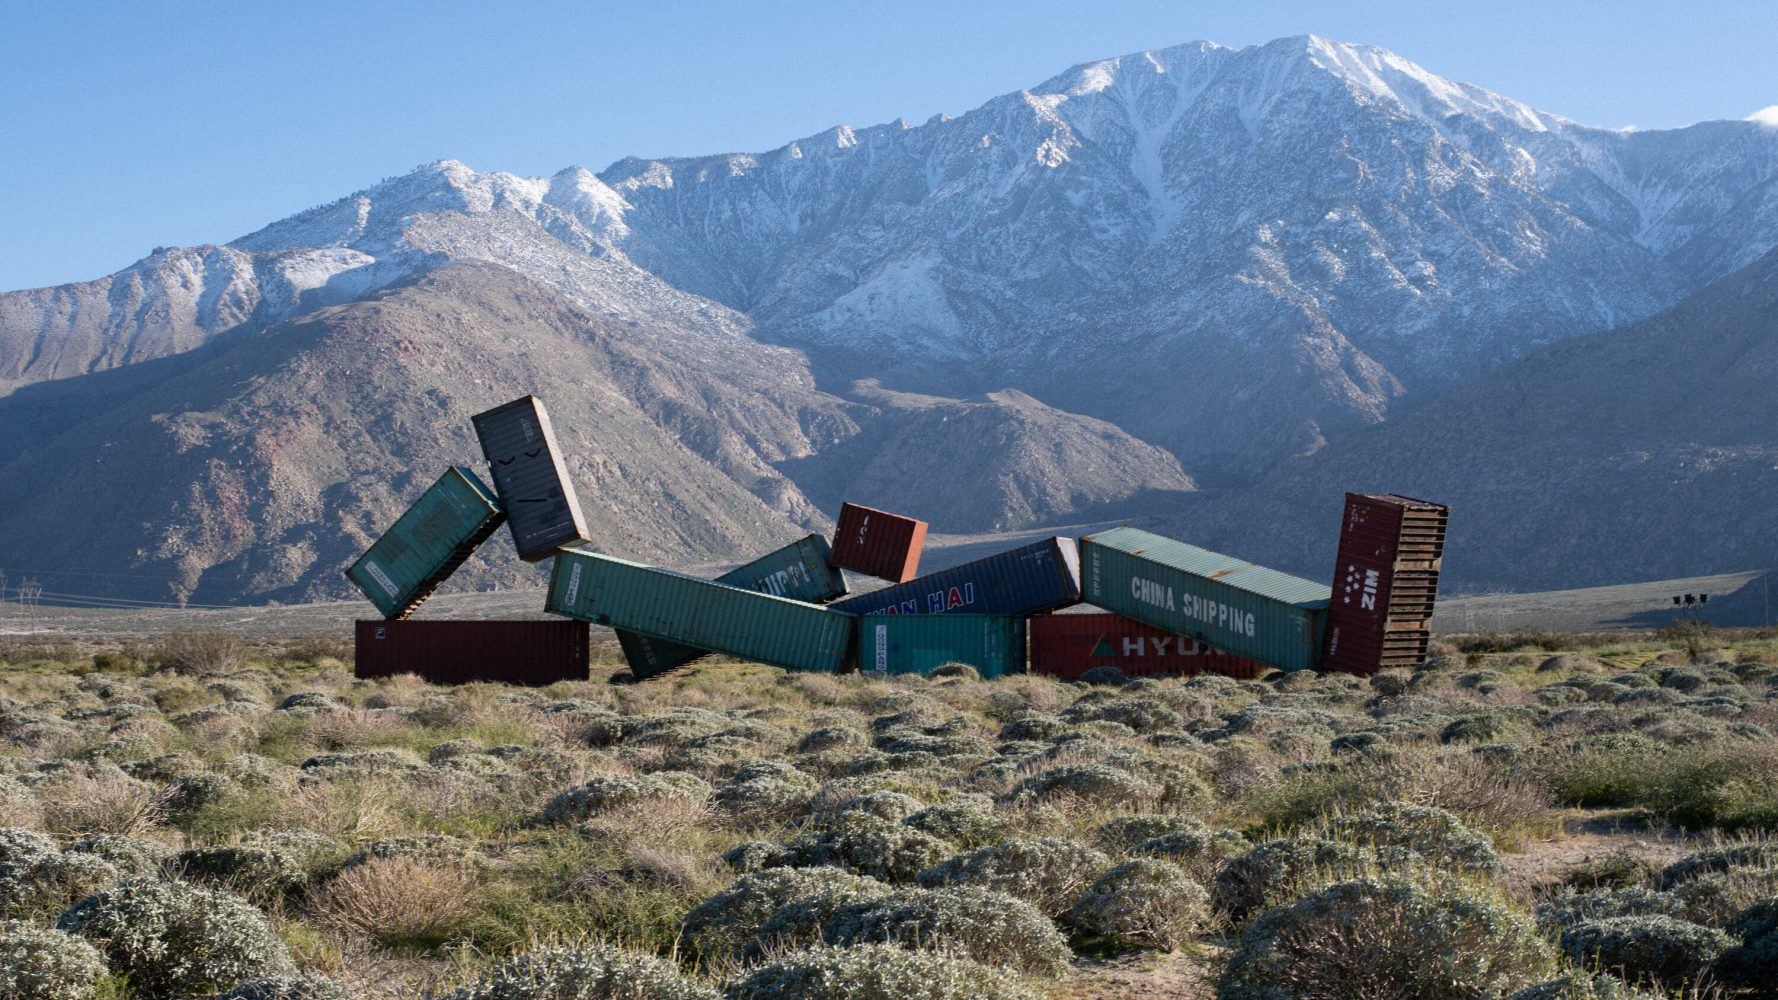 shipping containers posed in the desert 